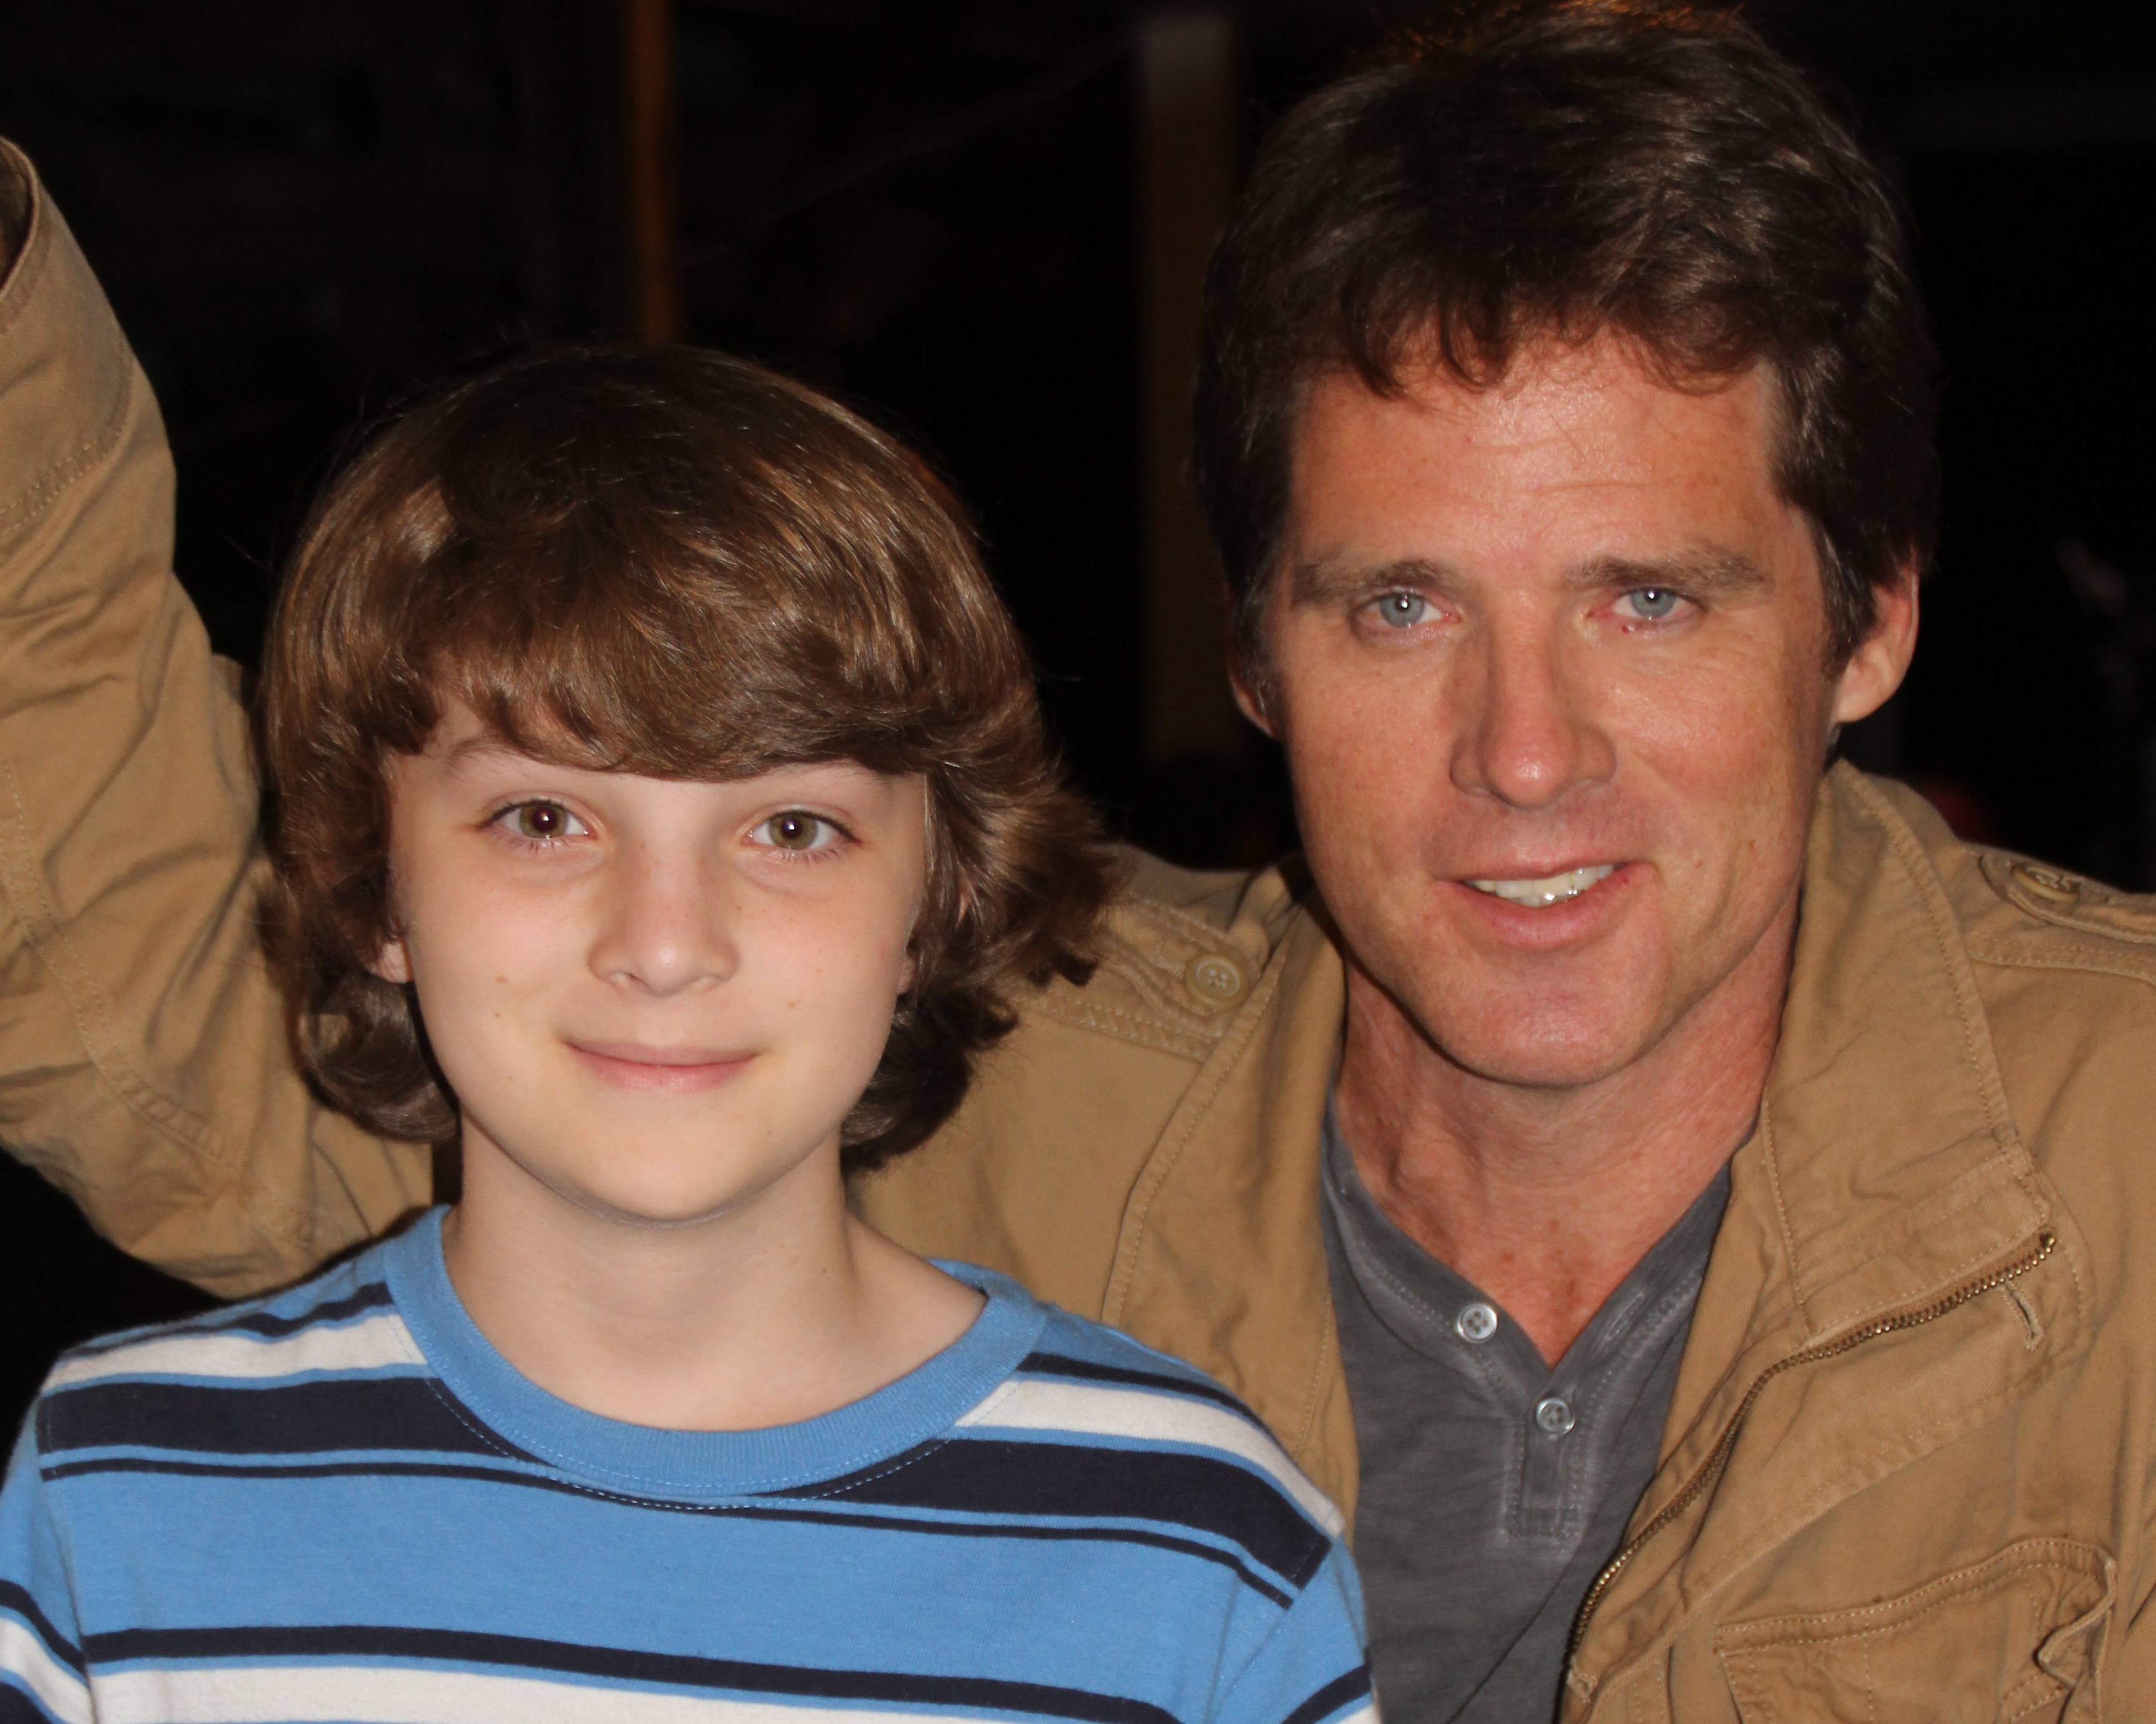 Toby as the younger version of Ben Browder on the set of Dead Still.